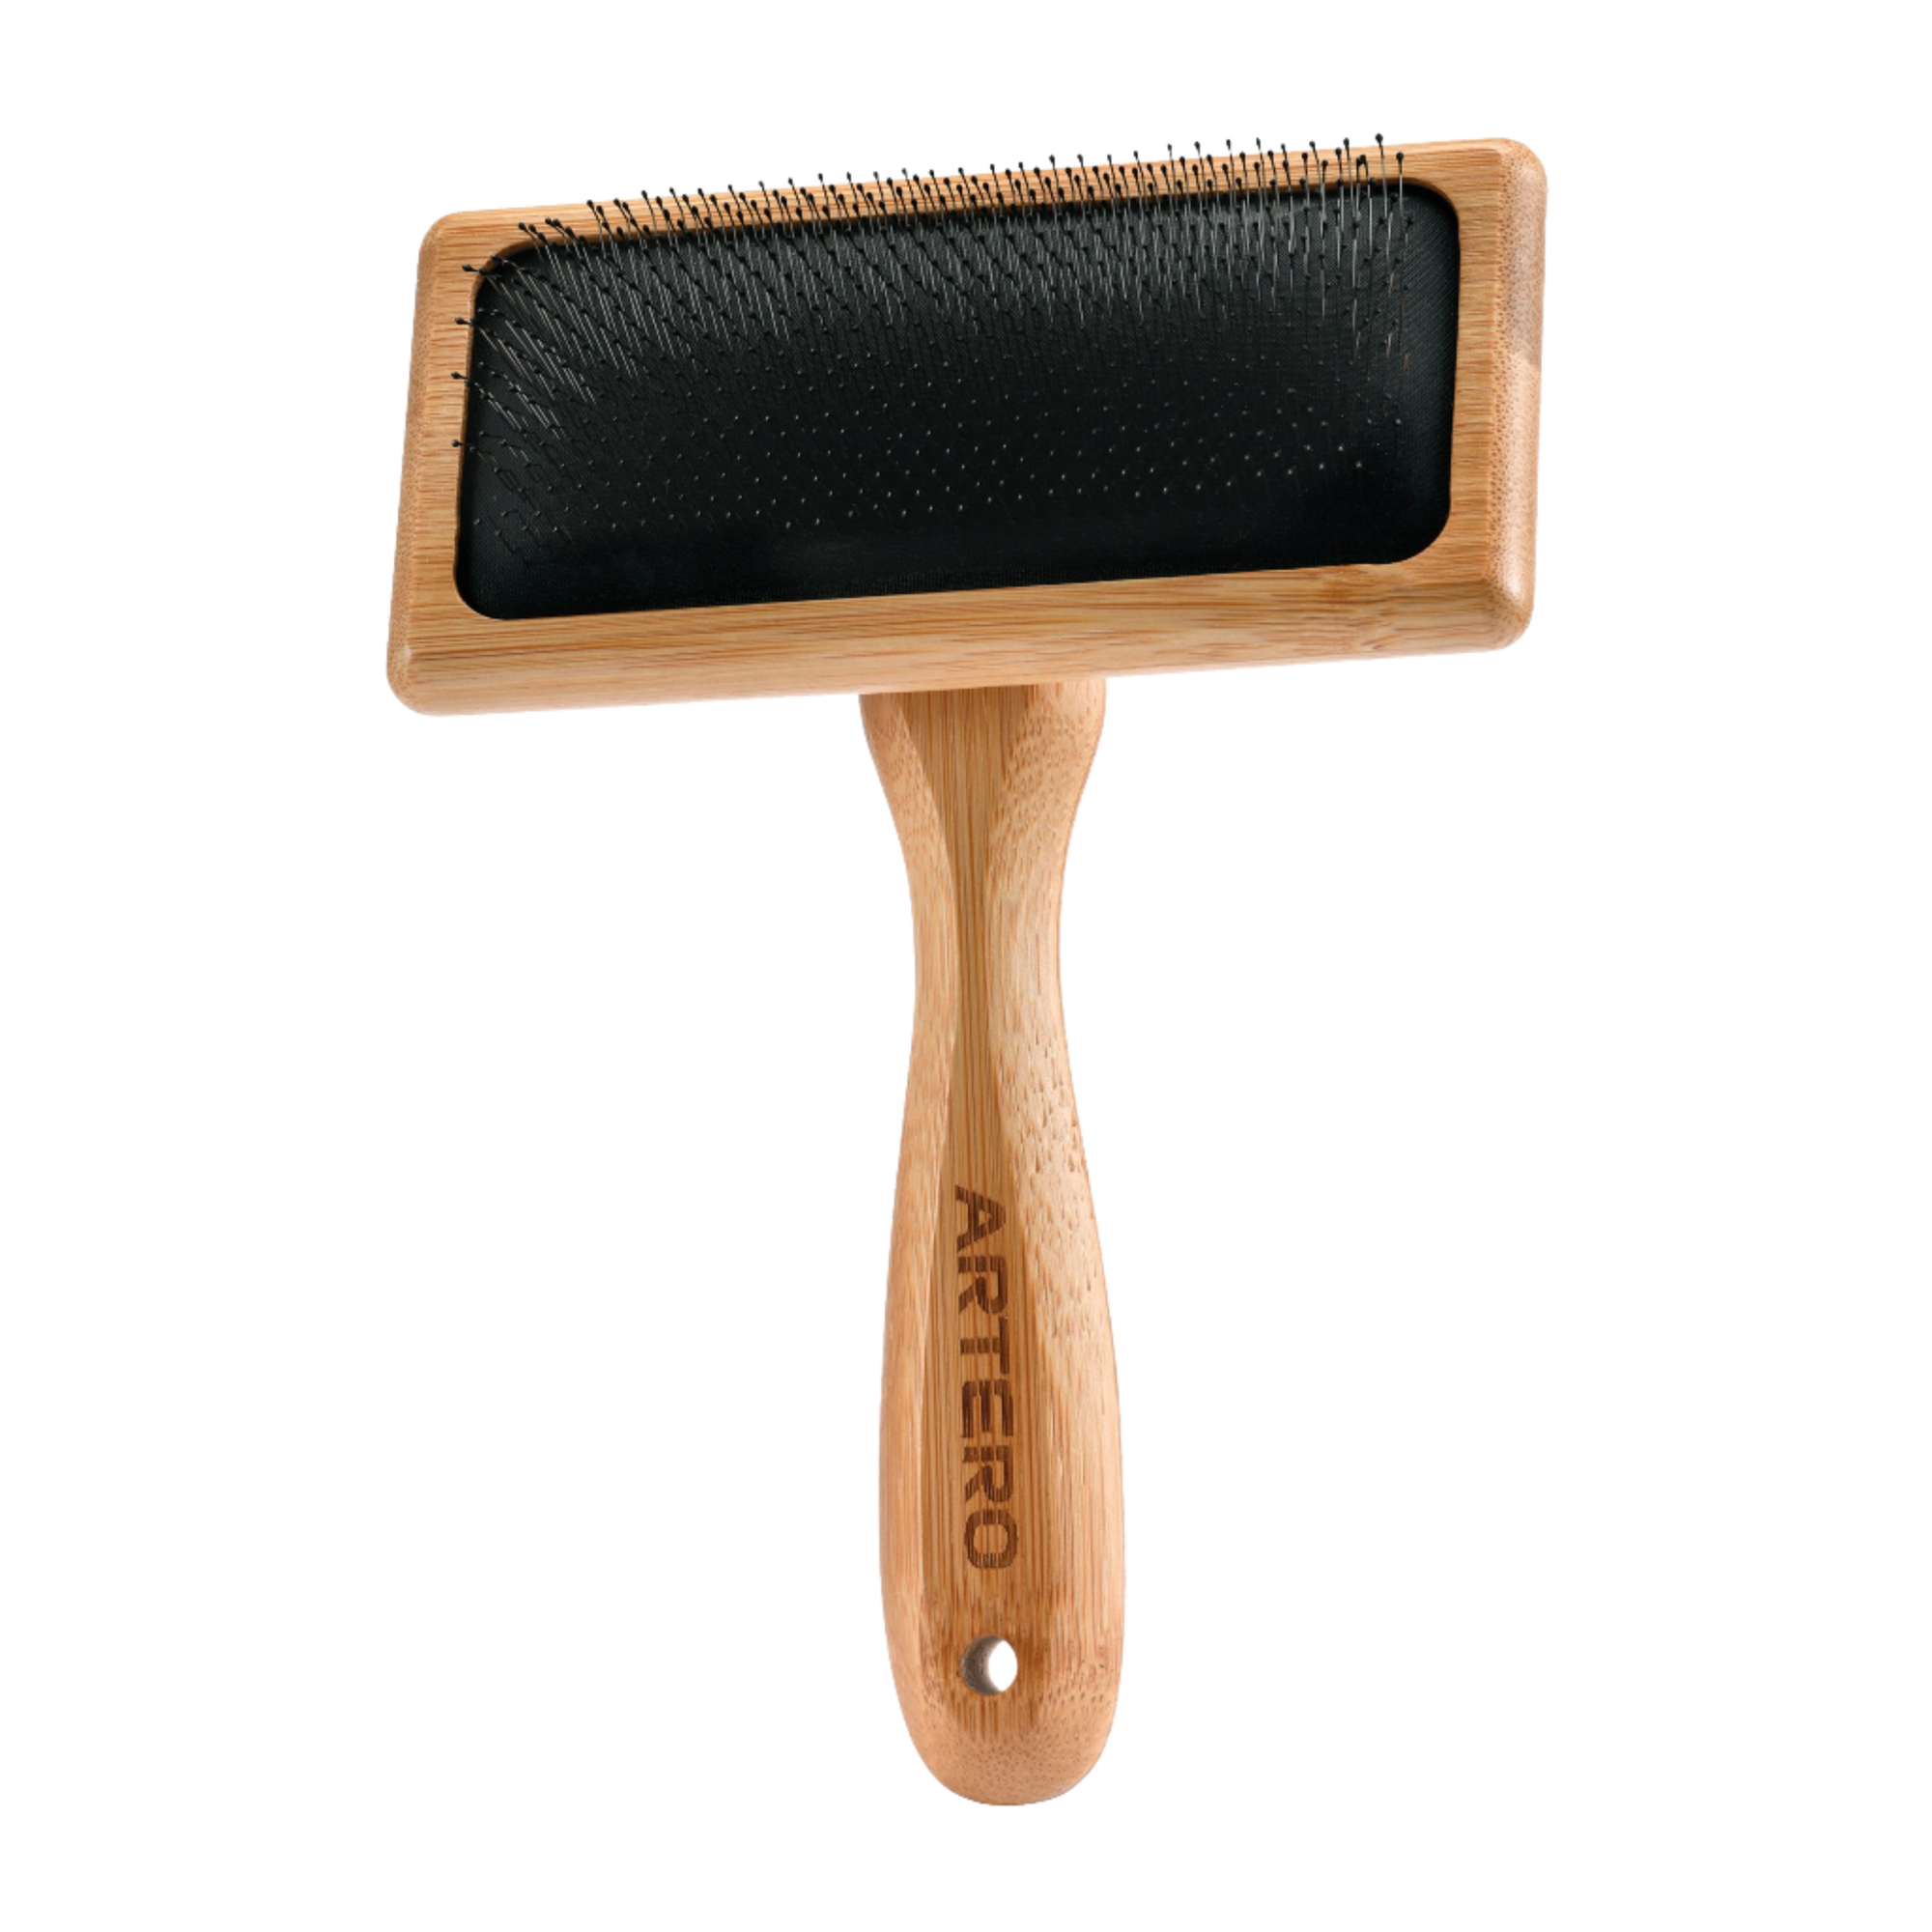 Nature Collection Protected Pin Medium Slicker Brush by Artero